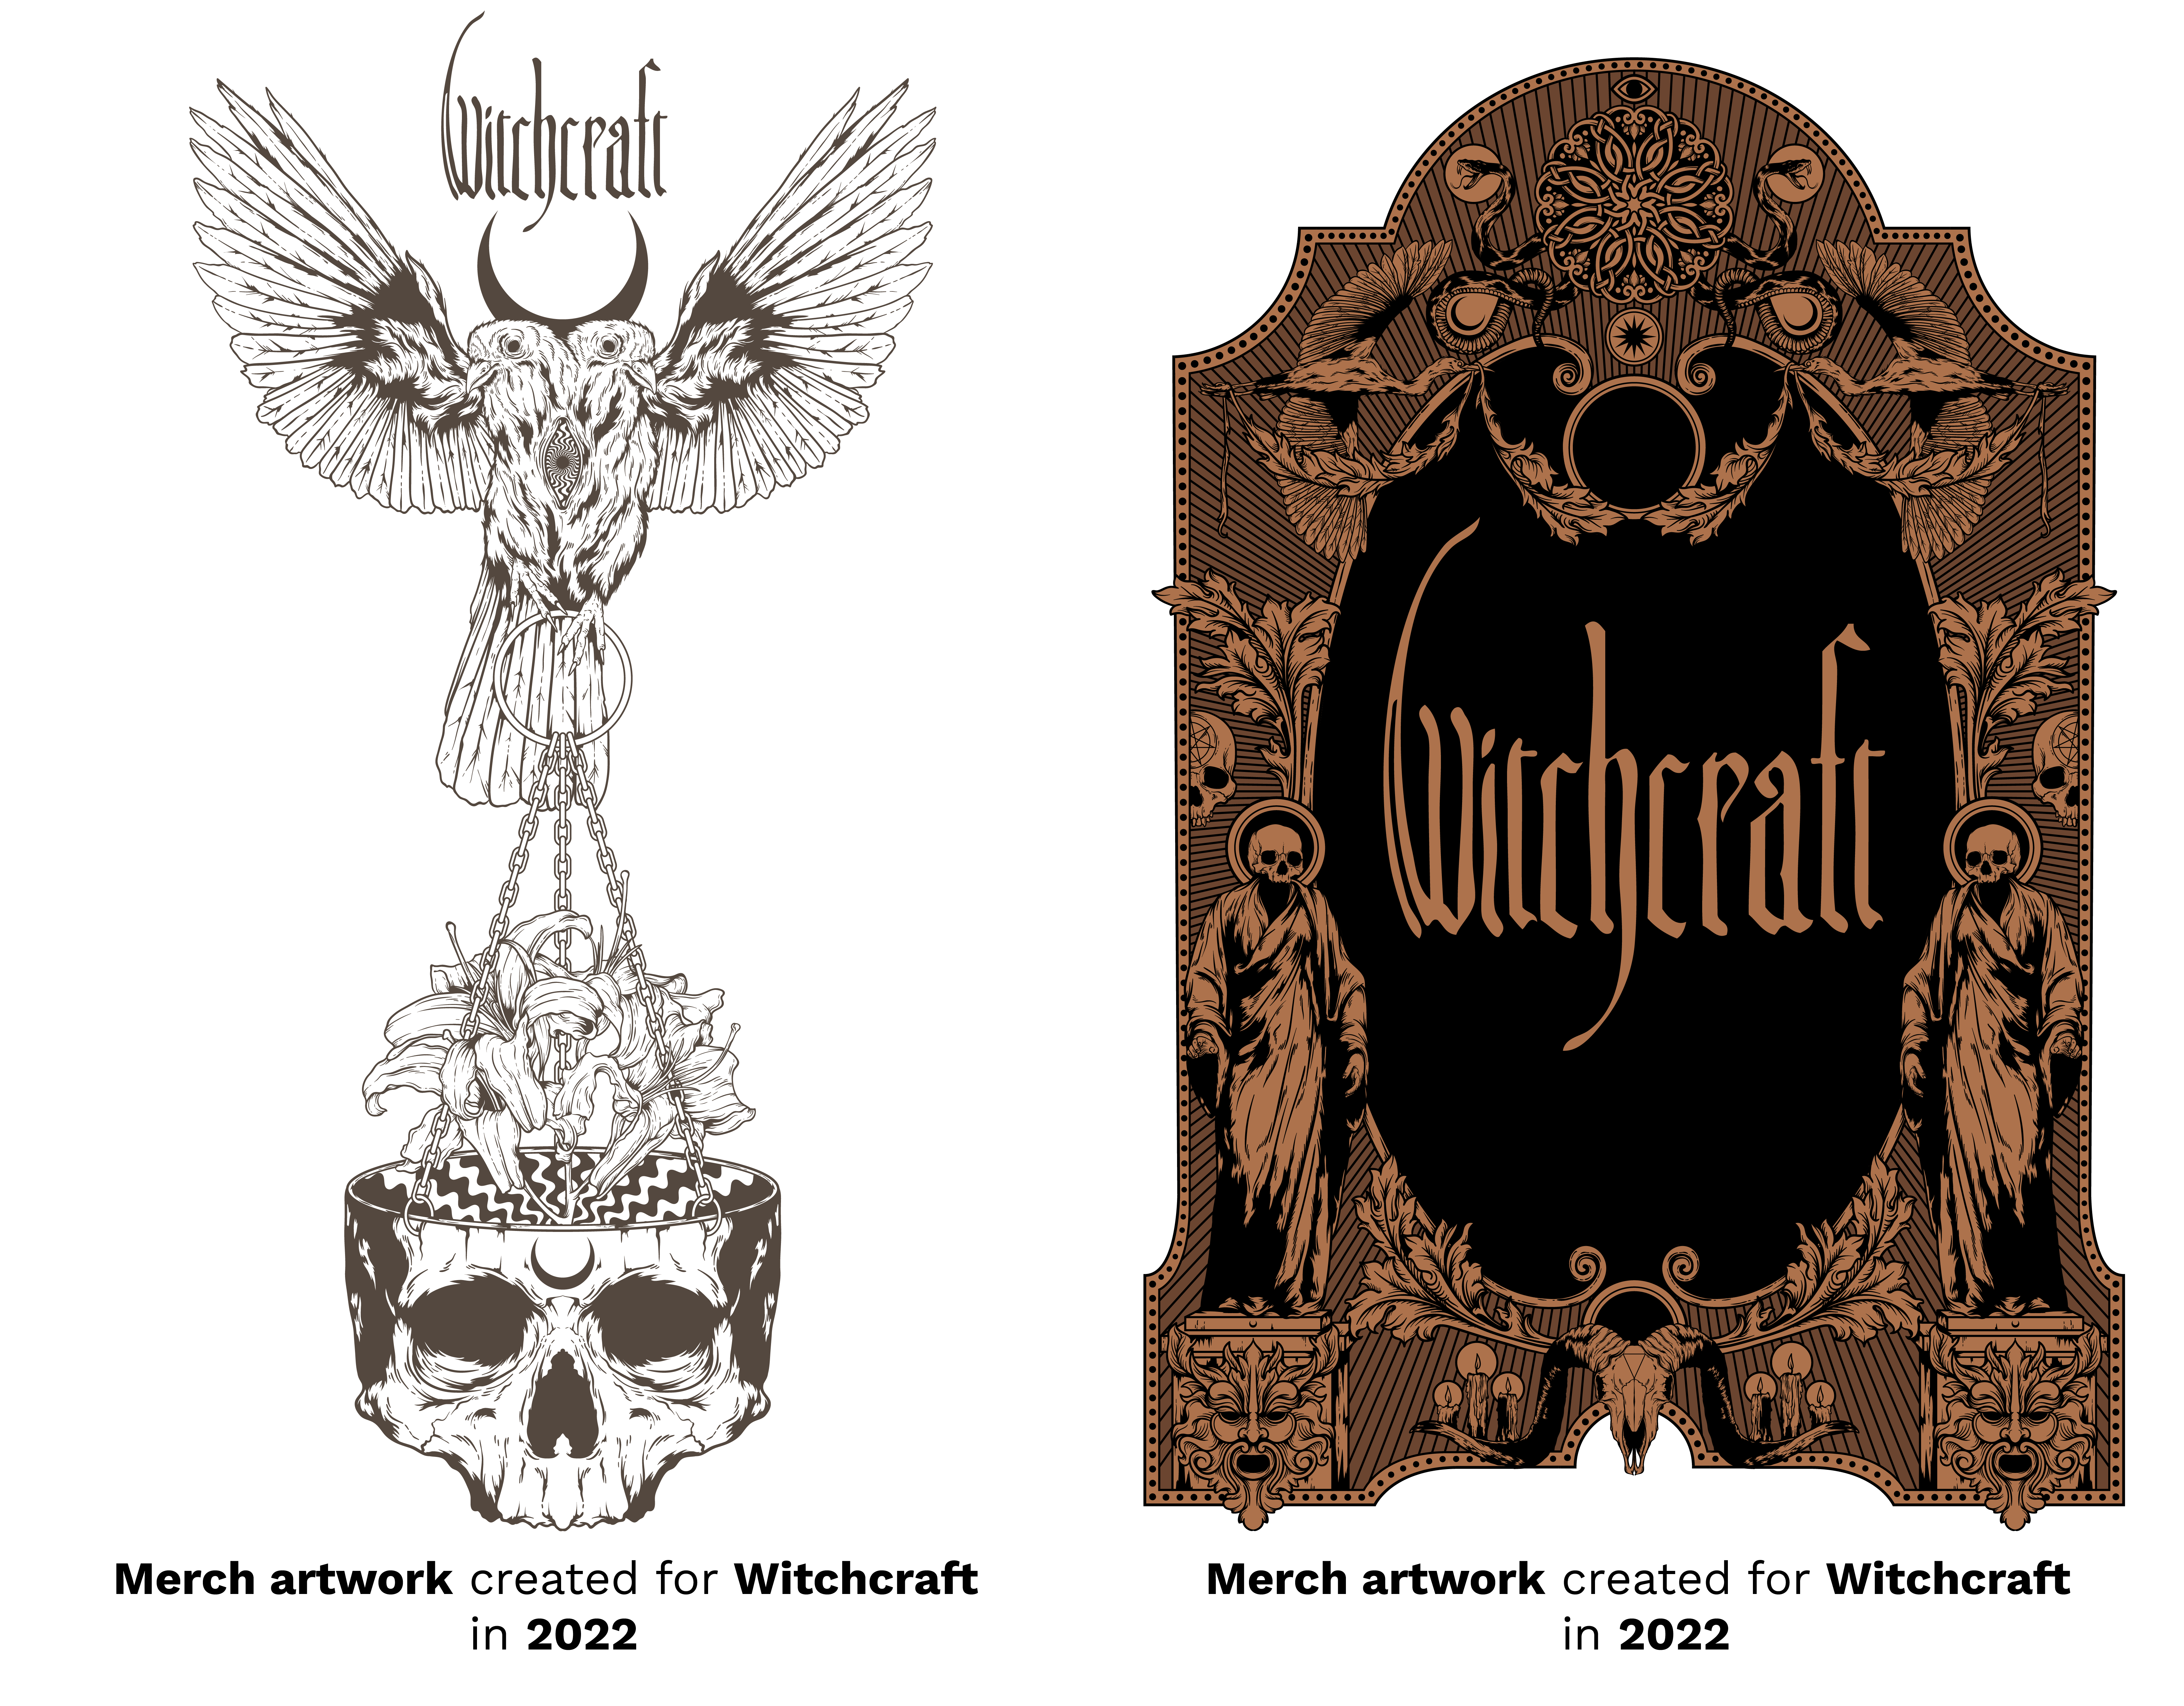 Merch artwork created for witchcraft